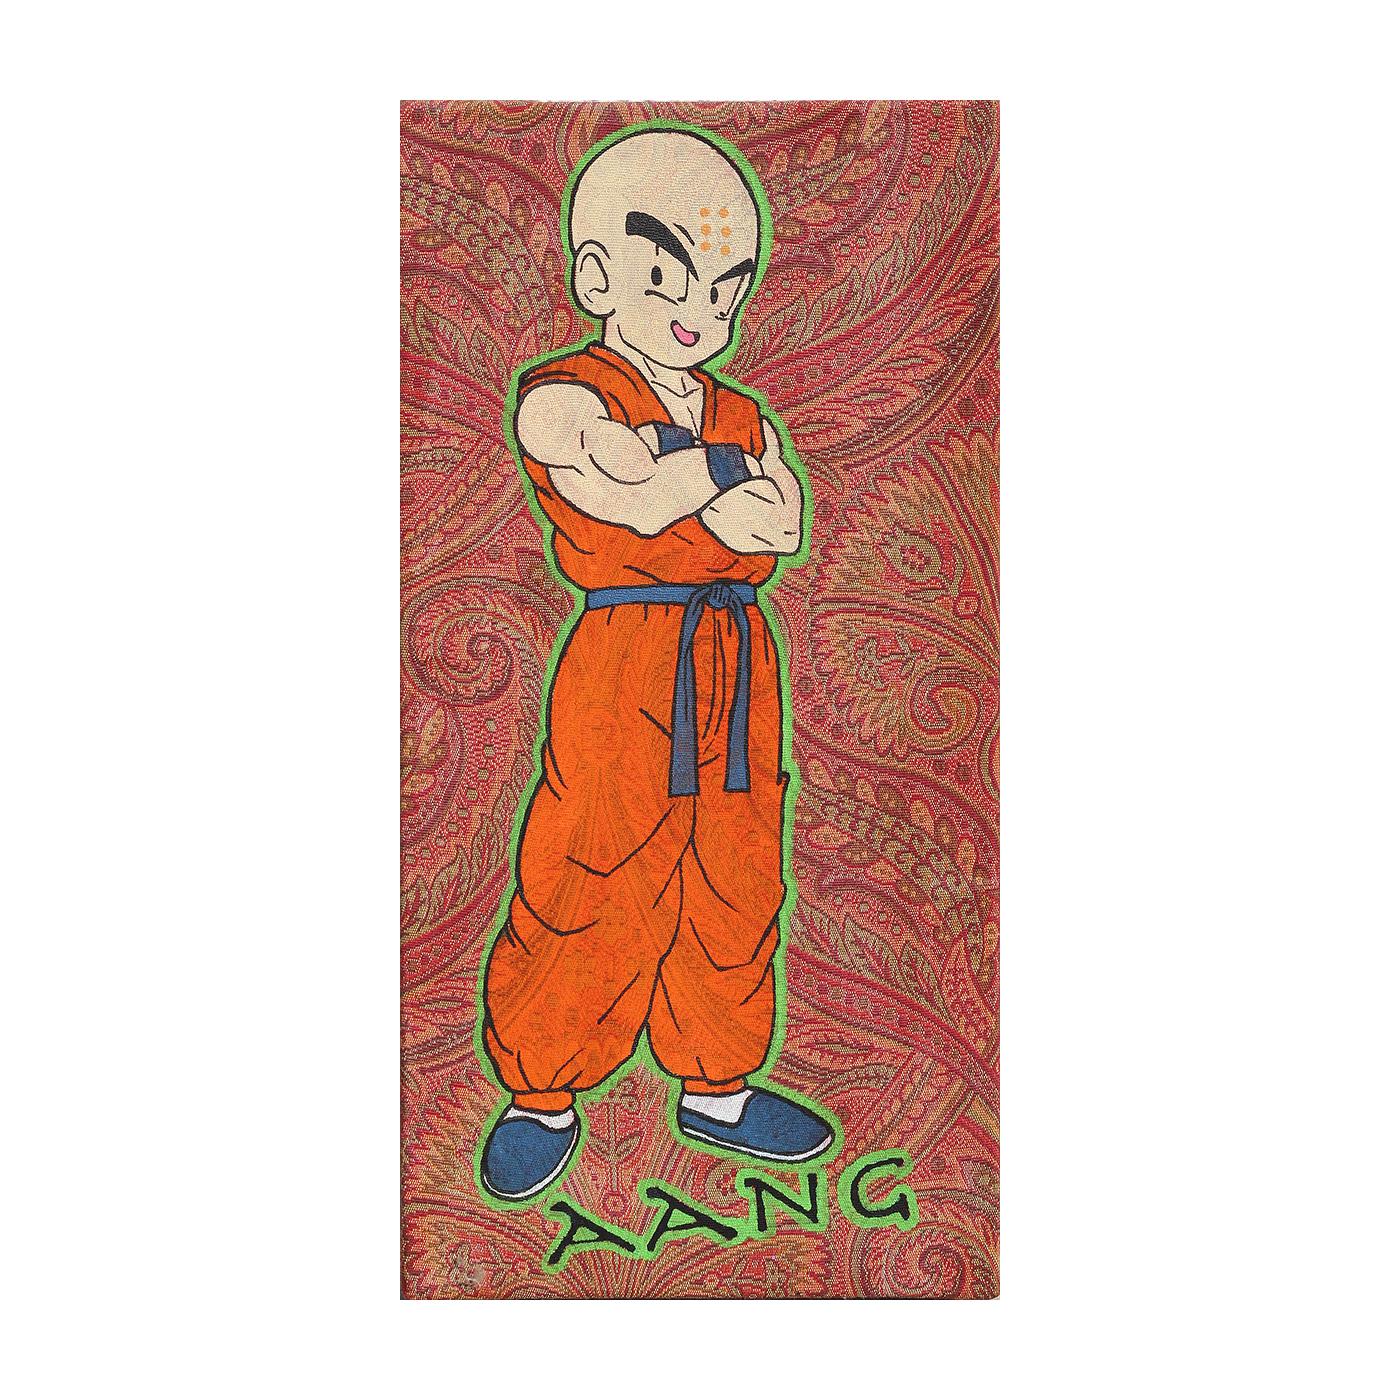 Mr. Painty Abstract Painting - "Aang" Small Longitudinal Orange Toned Abstract Aang Pop Art Painting on Brocade